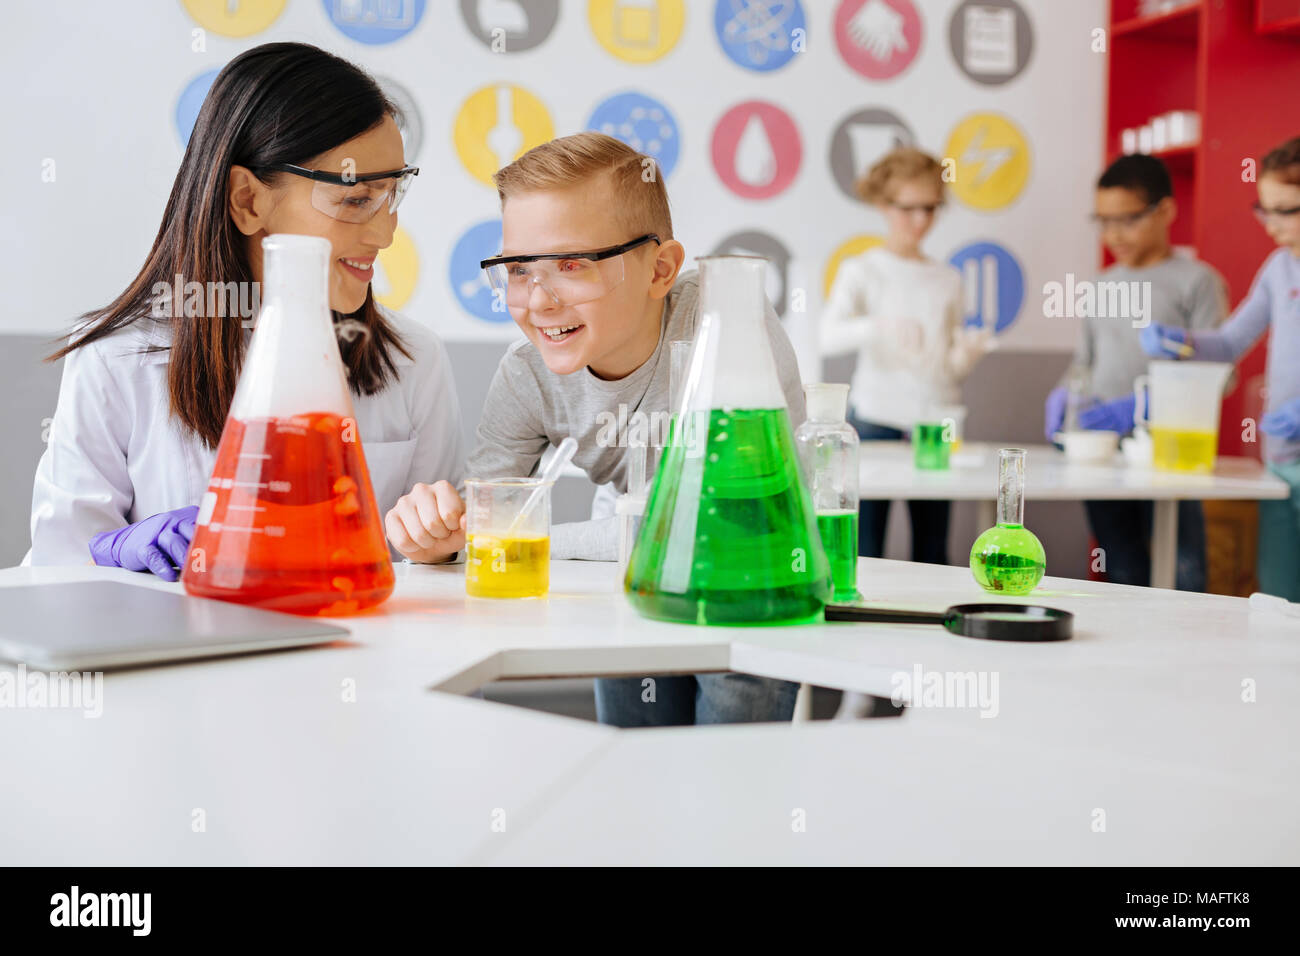 Joyful chemistry teacher and student talking about experiment and laughing Stock Photo